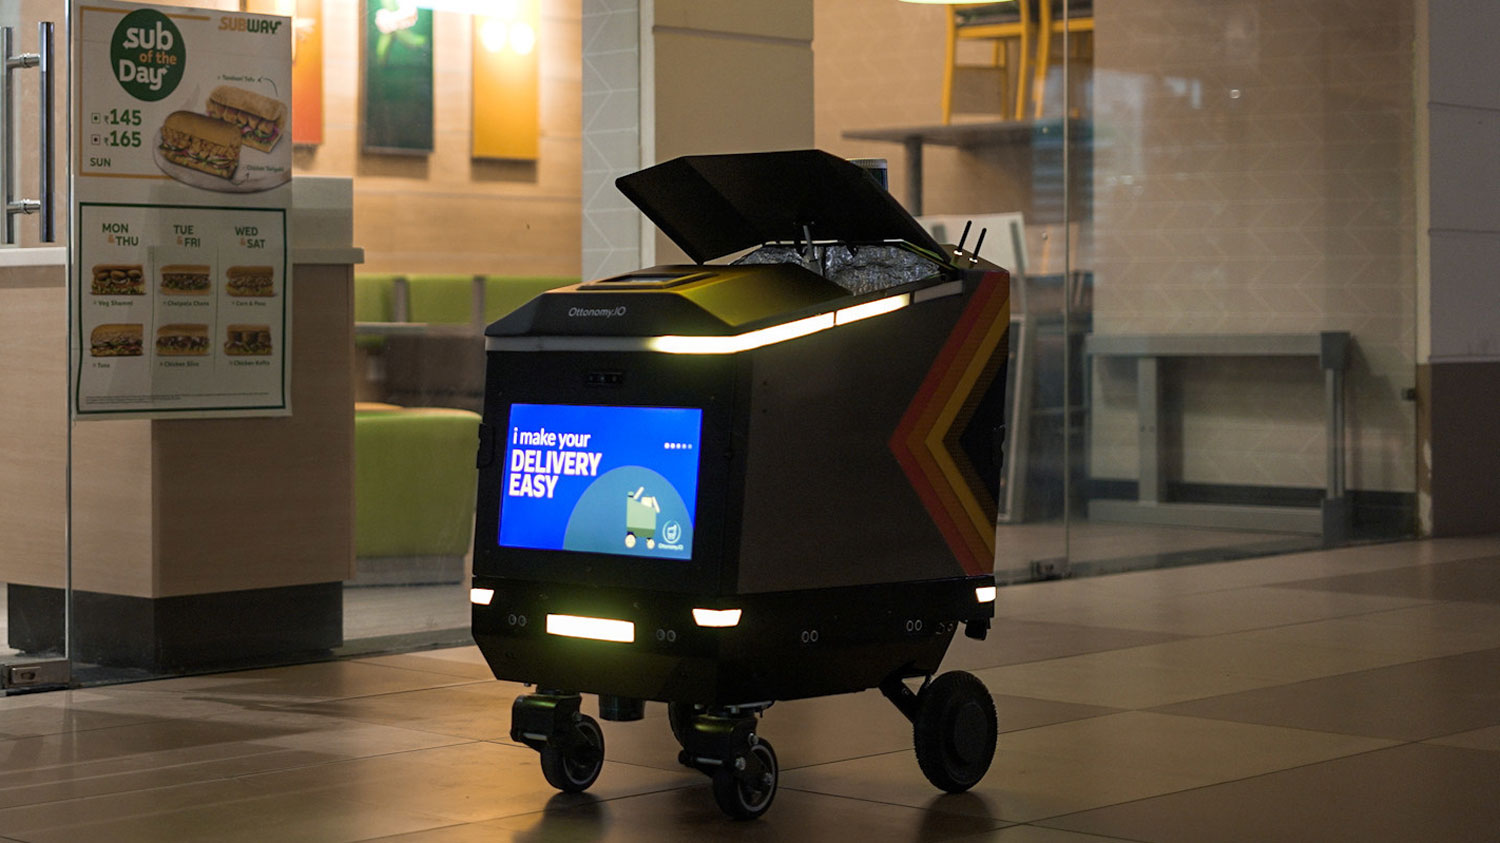 An Ottonomy delivery robot, which looks like a self-propelled shopping cart, in an indoor mall.